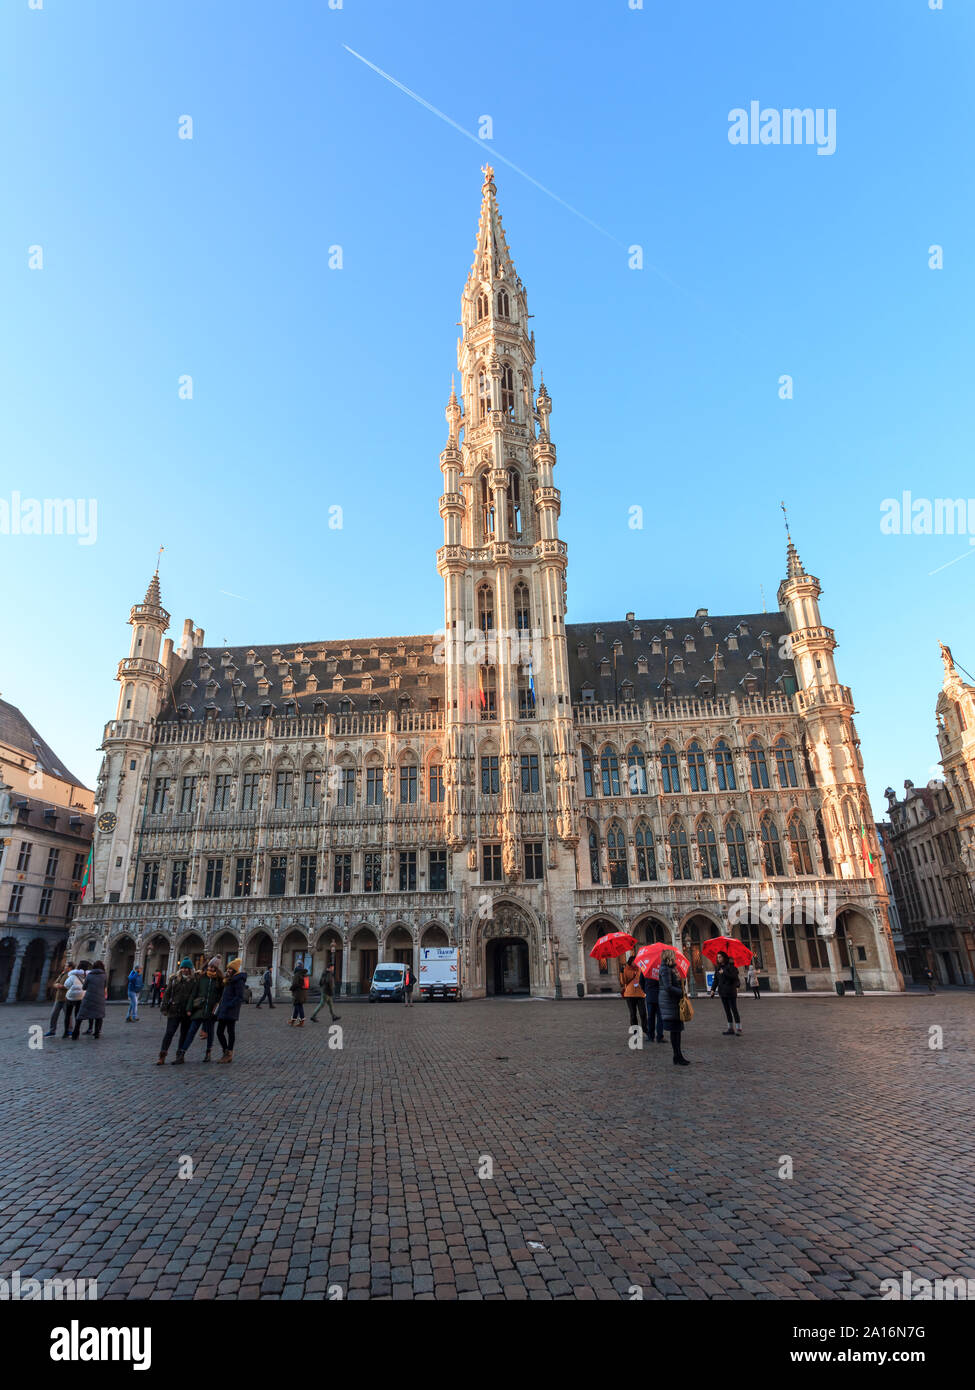 Brussels, Belgium - 21.01.2019: Grand Place (Grote Markt) with Town Hall (Hotel de Ville) and Maison du Roi (King's House or Breadhouse) in Brussels. Stock Photo